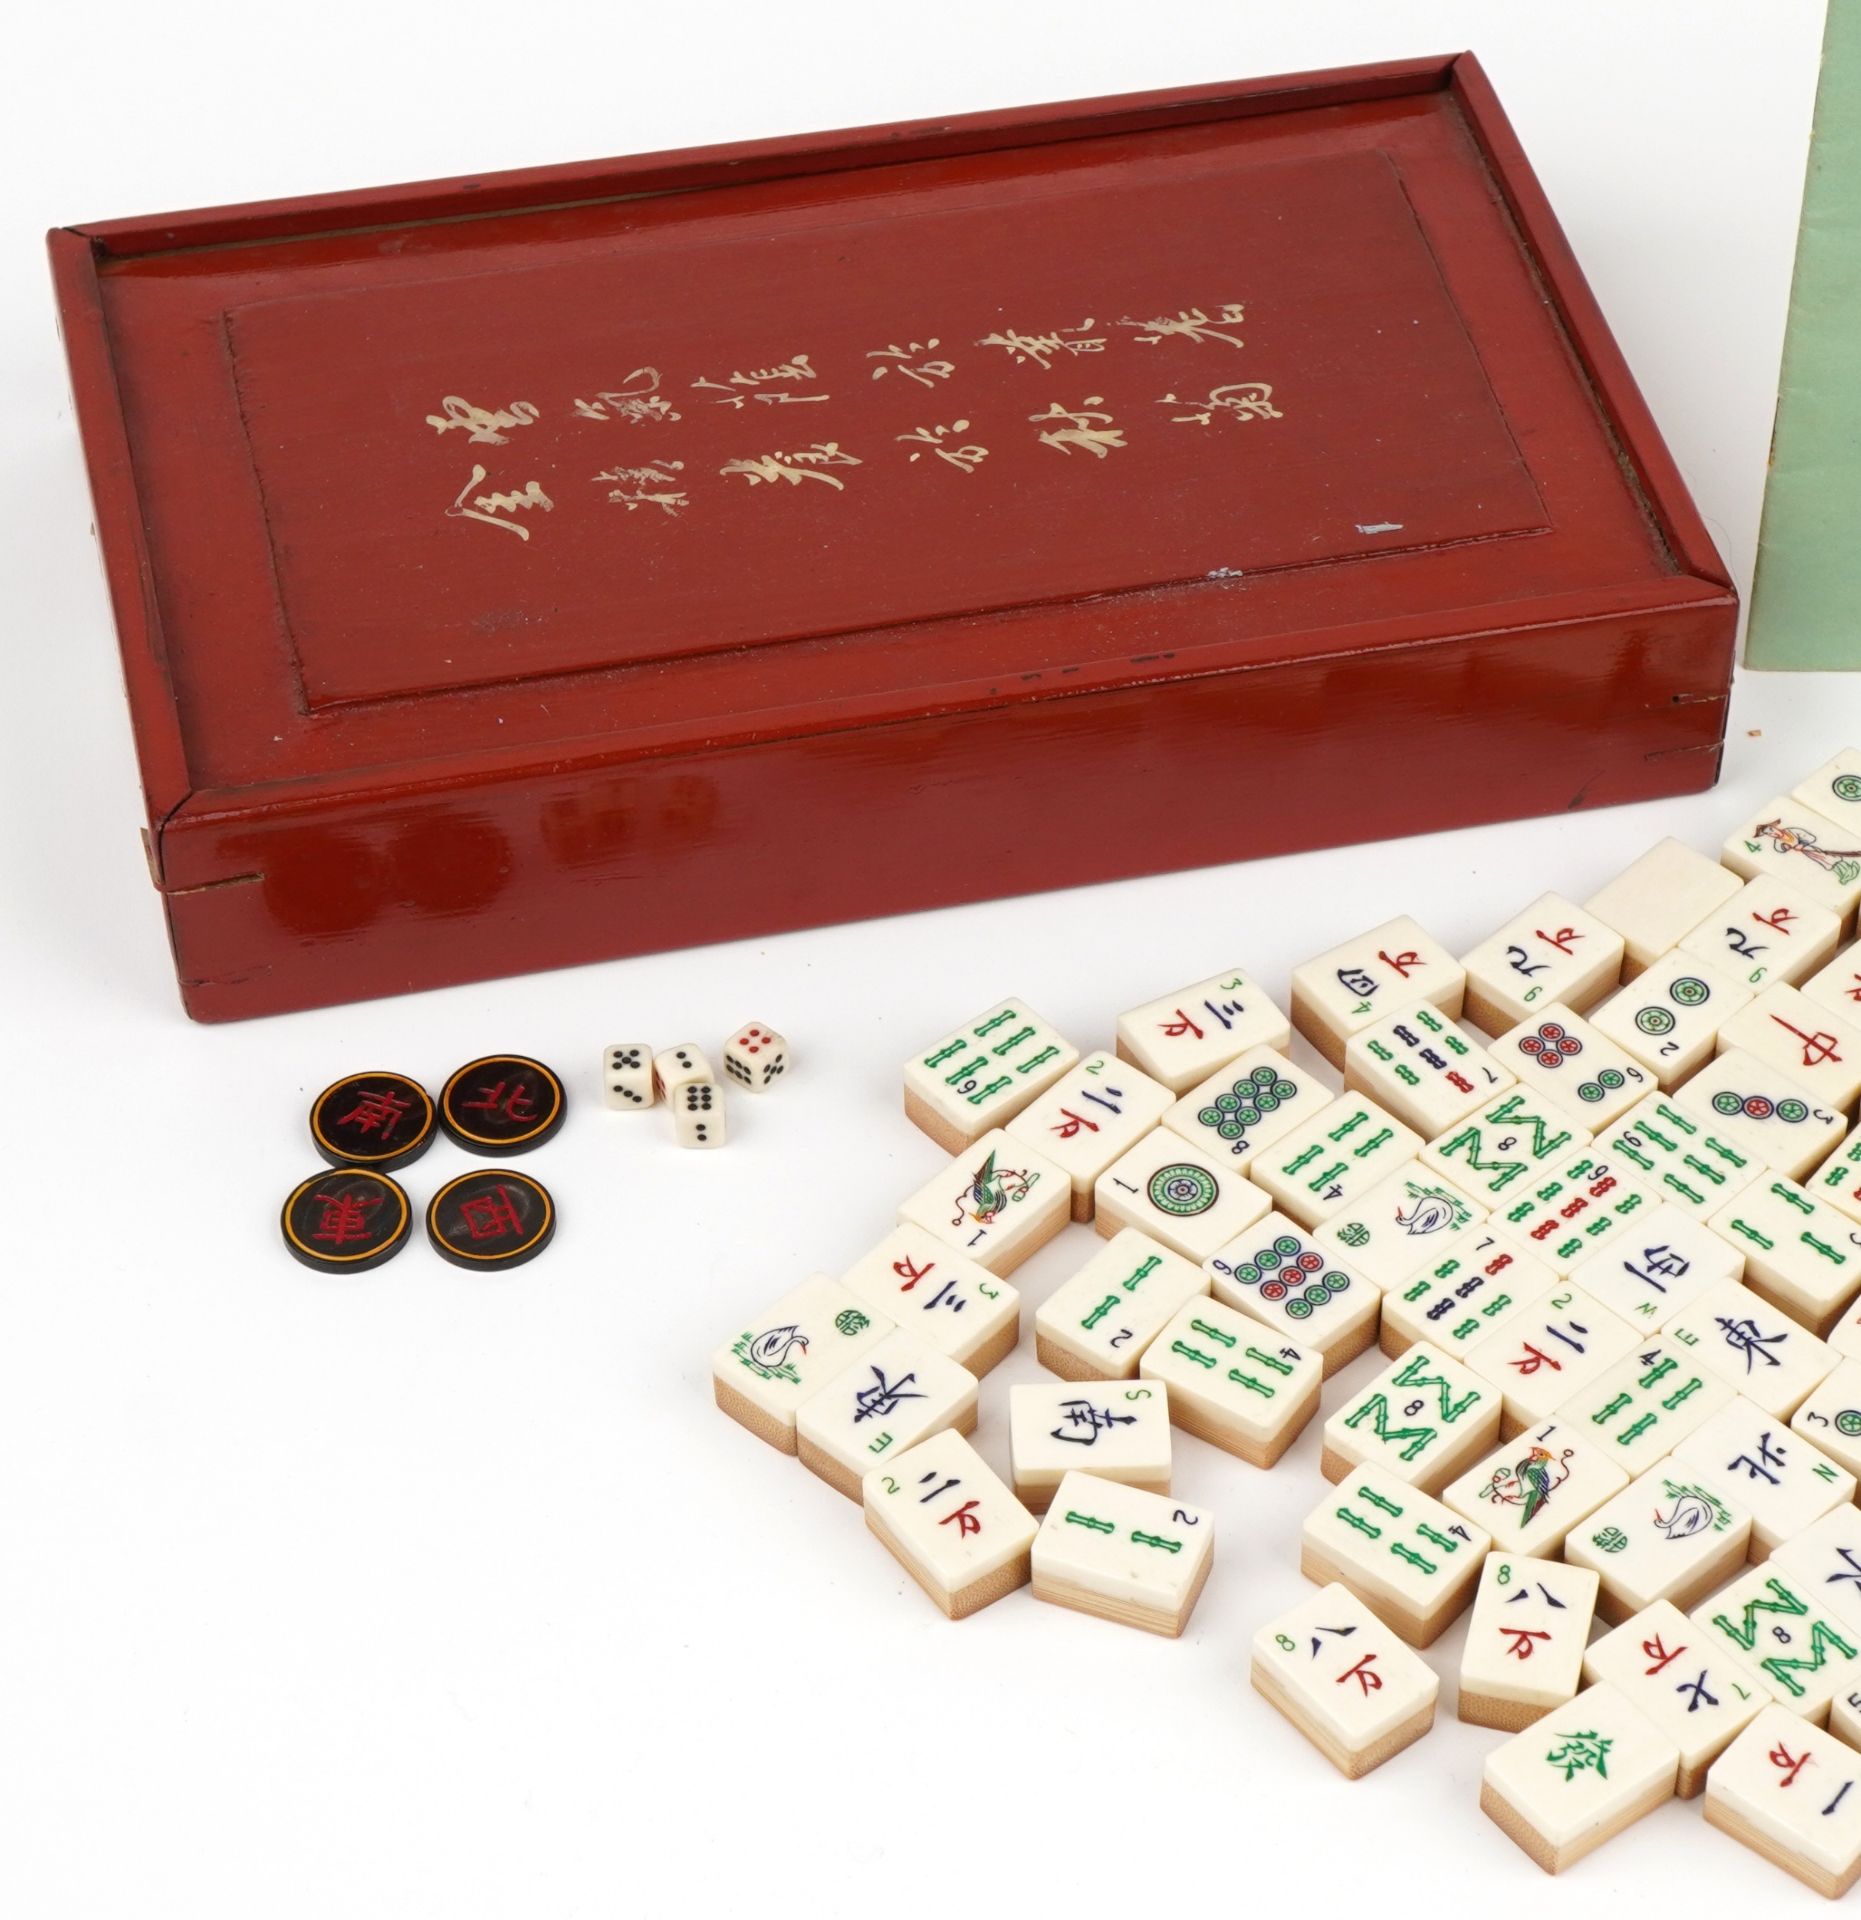 Early 20th century Chinese bone and bamboo mahjong set with hardwood case and booklets - Image 2 of 3